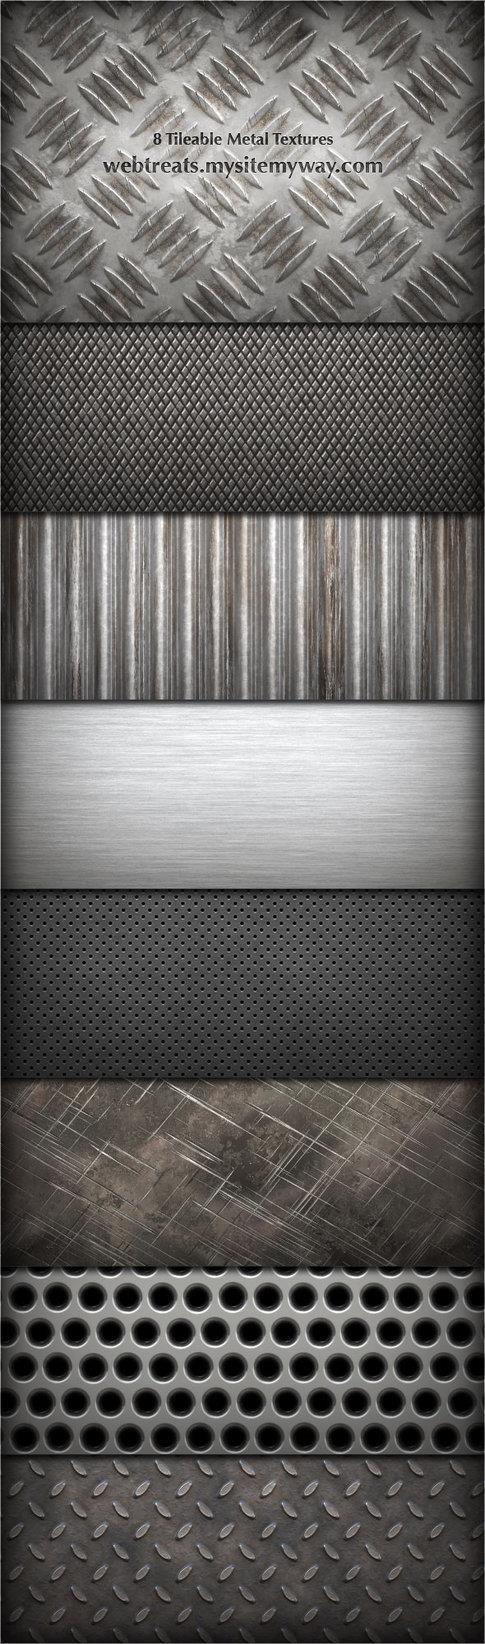 8 Tileable Metal Textures Pack